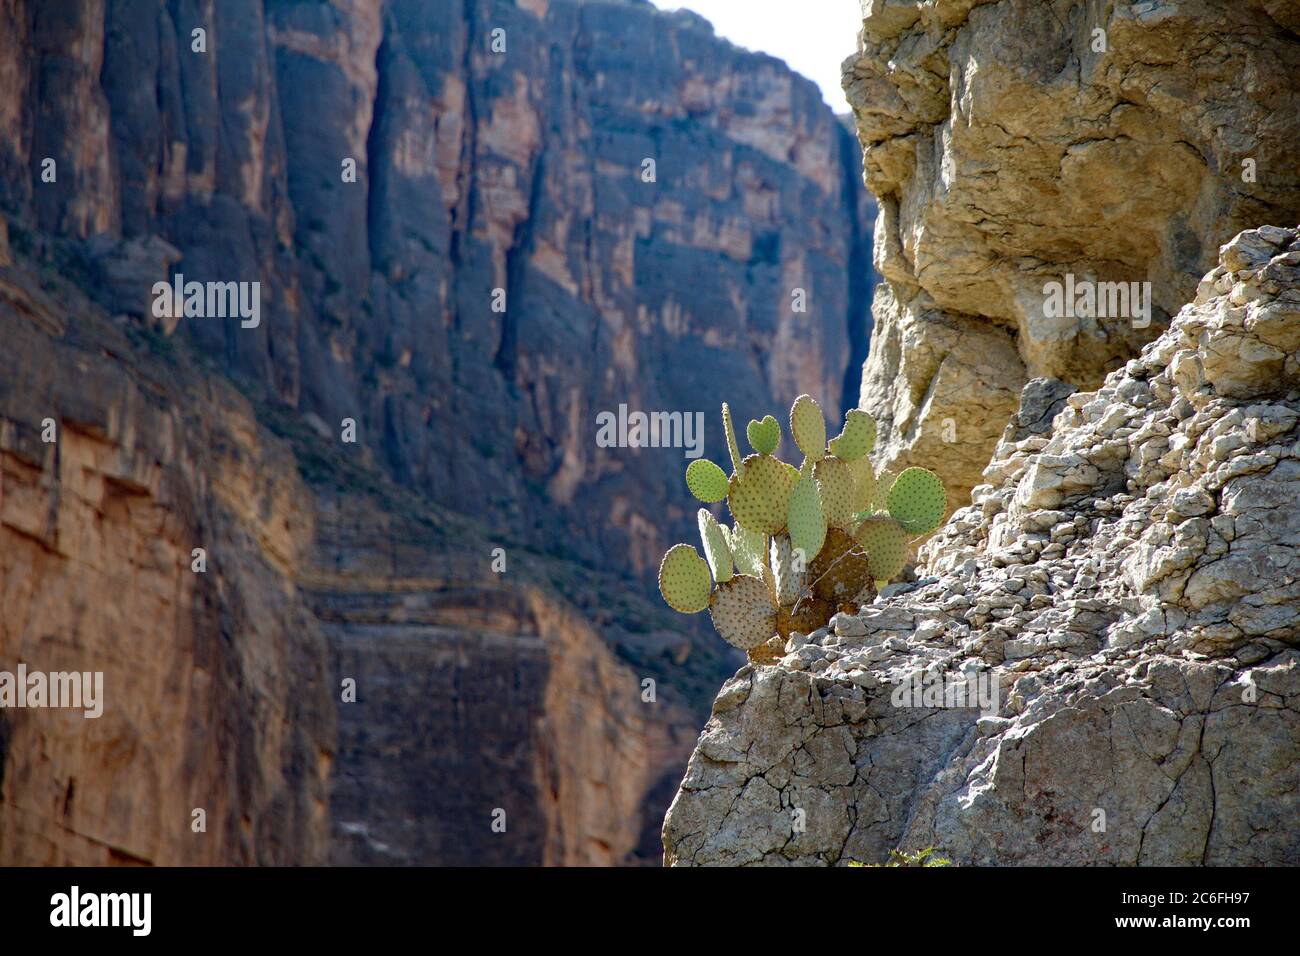 A bright green cactus clings on to a crumbling rock face of the Santa Elena Canyon, with the Rio Grande flowing fast underneath. USA border with Mexic Stock Photo